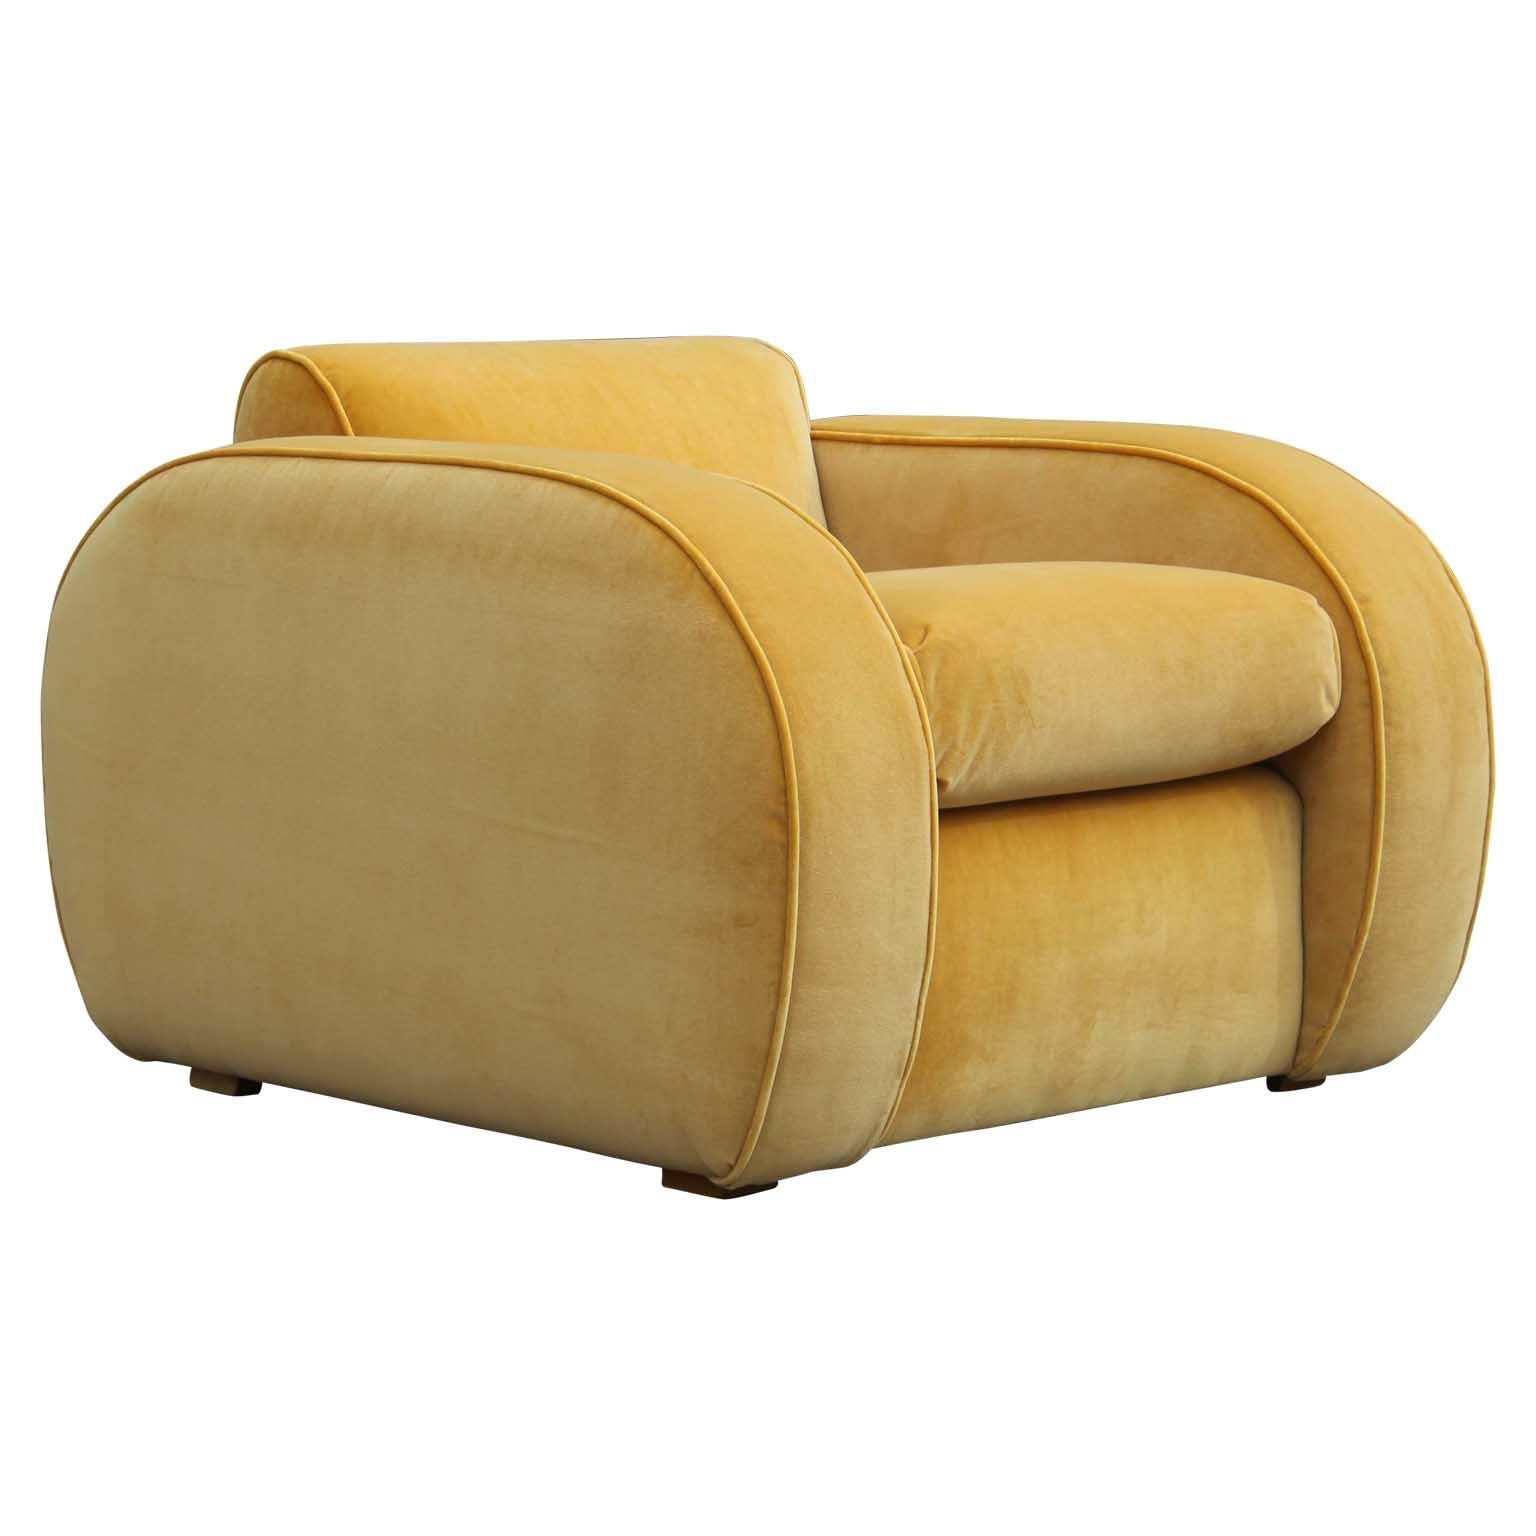 A pair of two beautiful large restored modern deco yellow velvet streamline club chairs.